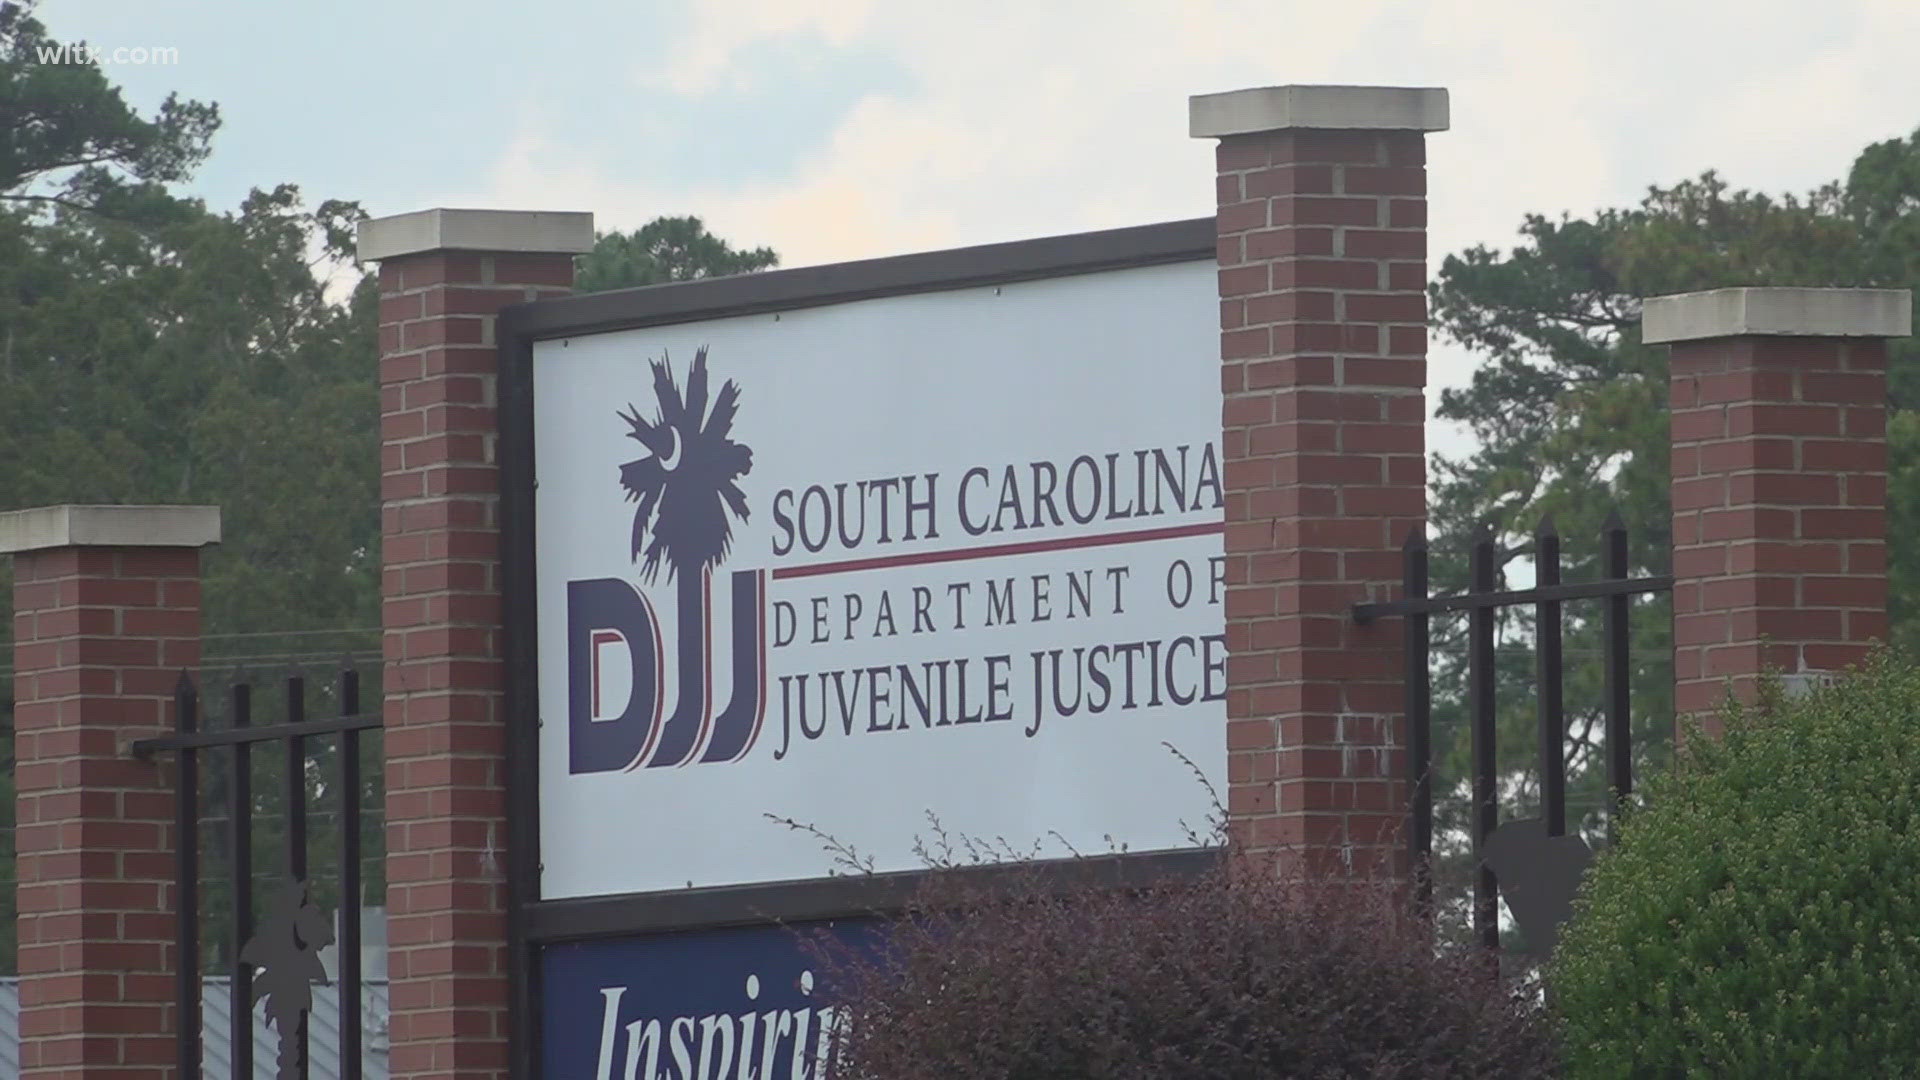 Juveniles who currently reside at Alvin S. Glenn are soon to be transferred to the Department of Juvenile Justice.